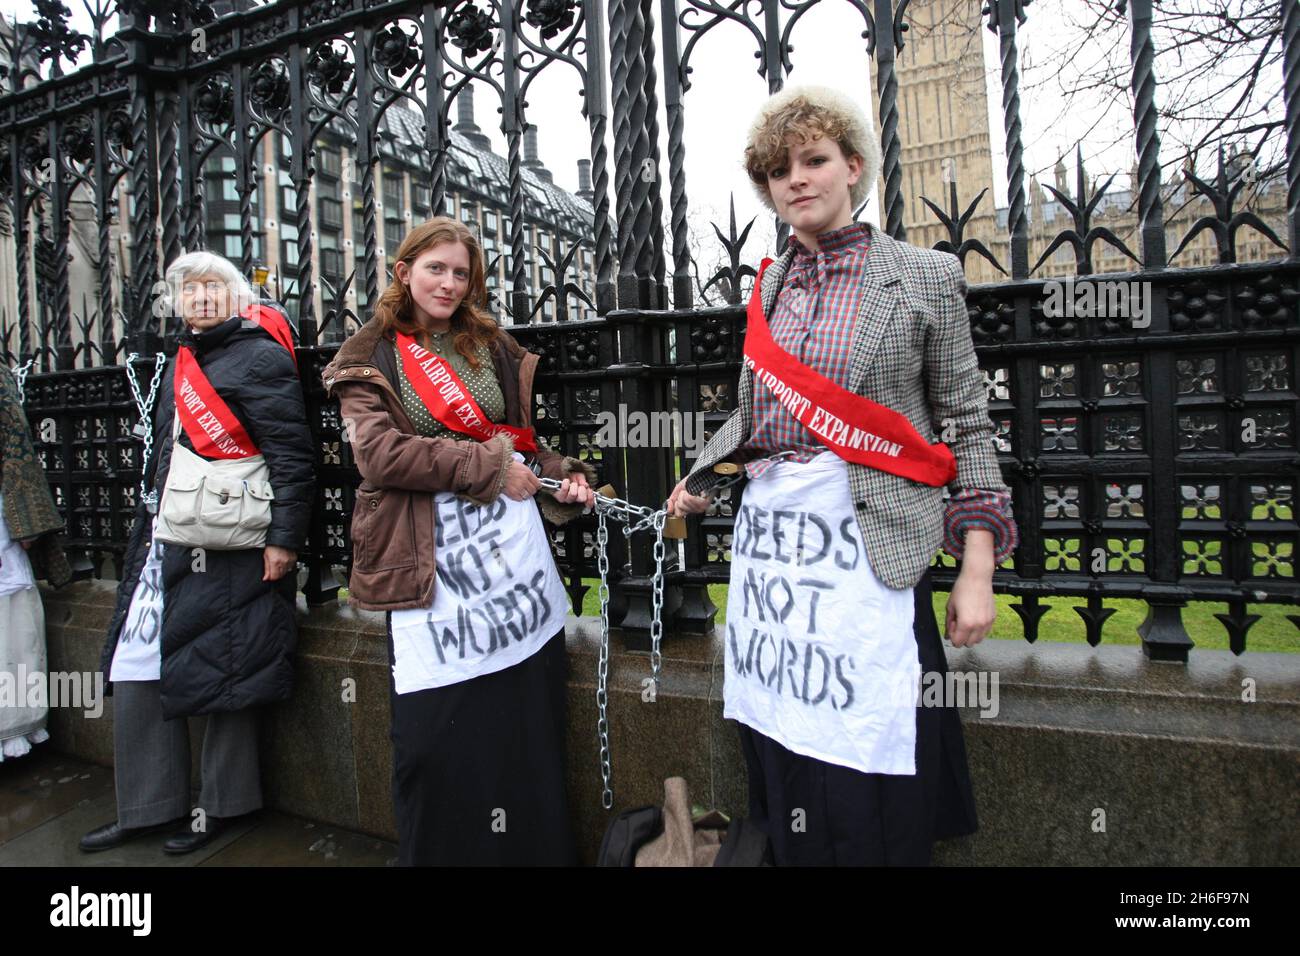 Protesters chained to the railings of the House Of Commons in London in demonstration against the proposed third runway at Heathrow Airport. Stock Photo